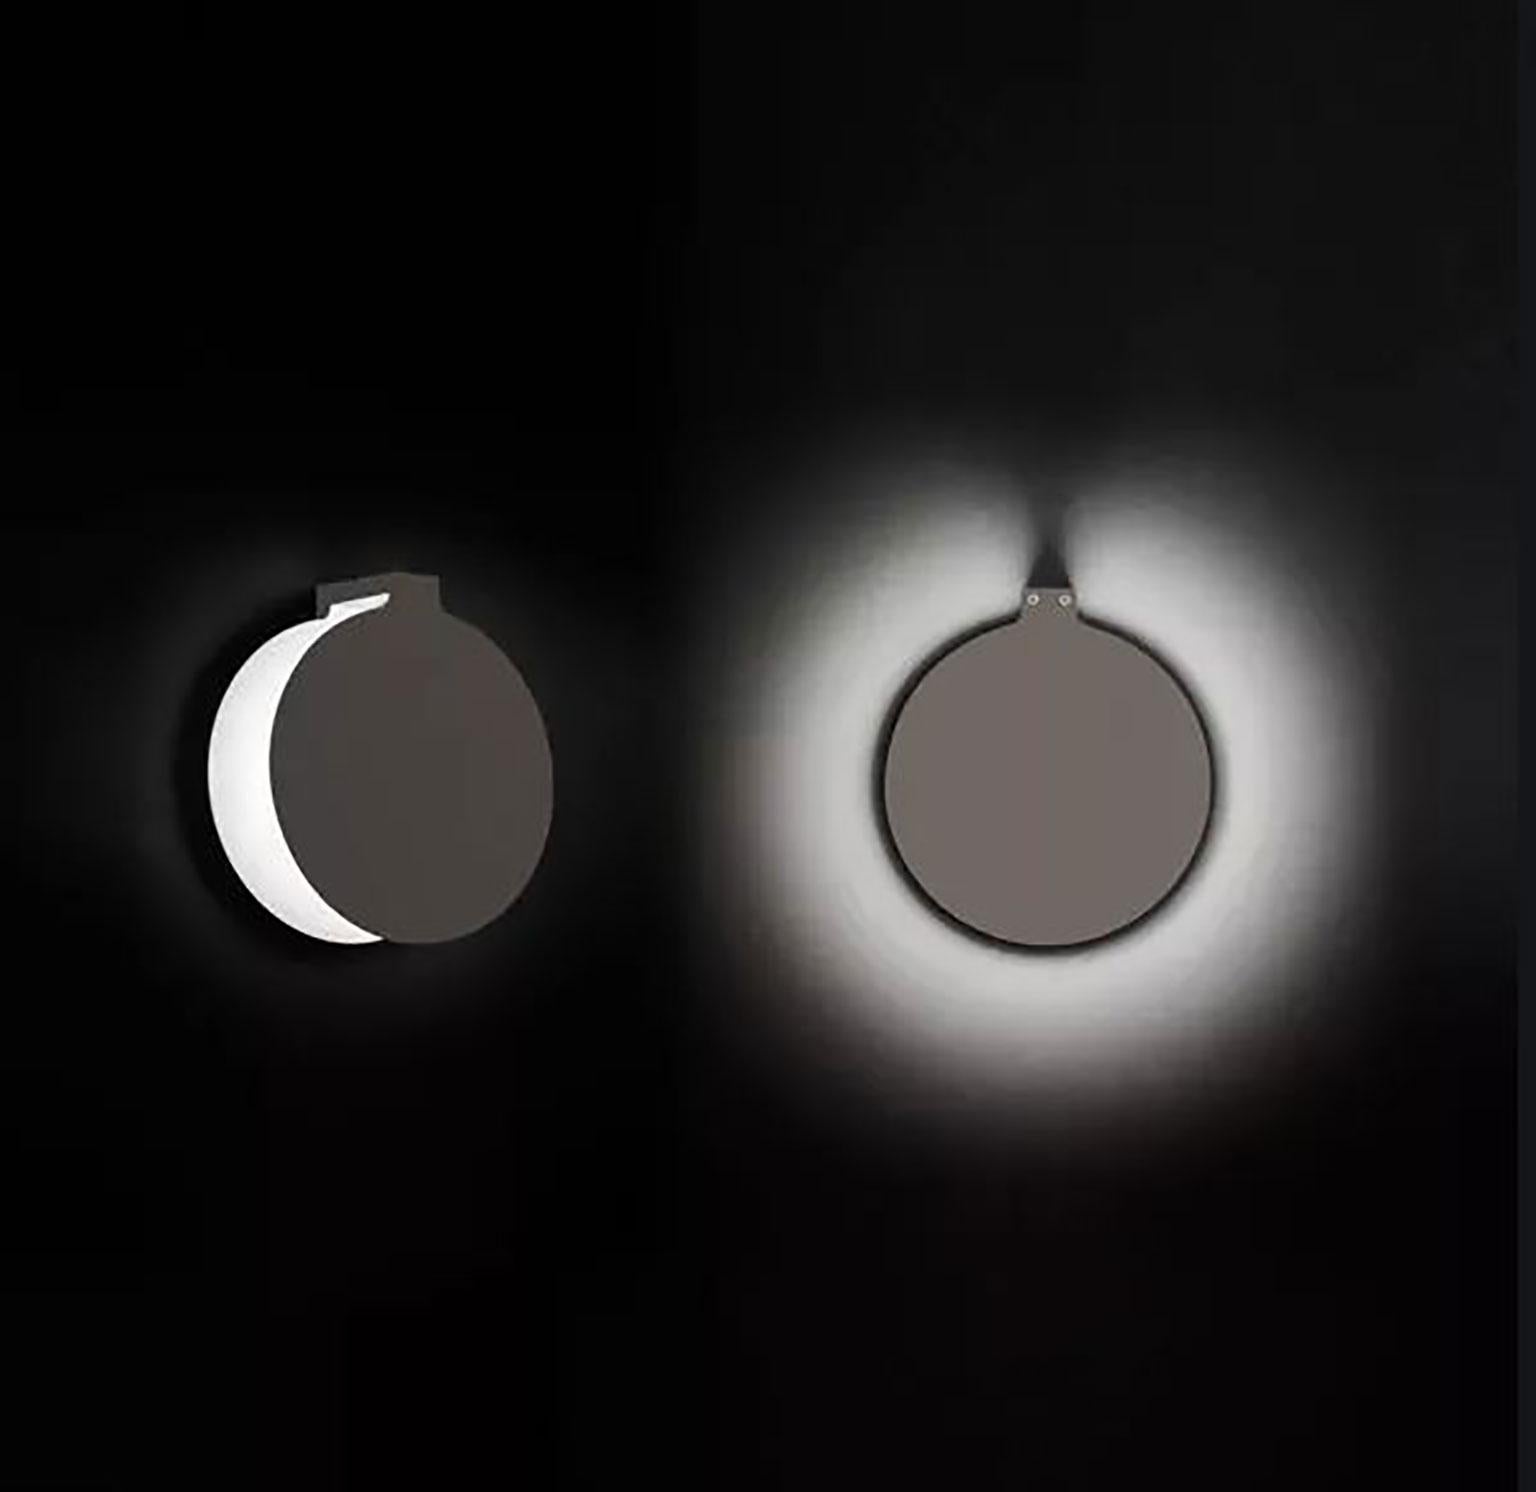 Duca wall lamp designed by Nicola Gallizia for Oluce. Elegant and dramatic, the light from this fixture is revealed differently to the observer depending on where you are standing and an almost lunar eclipse in progress is revealed as one walks